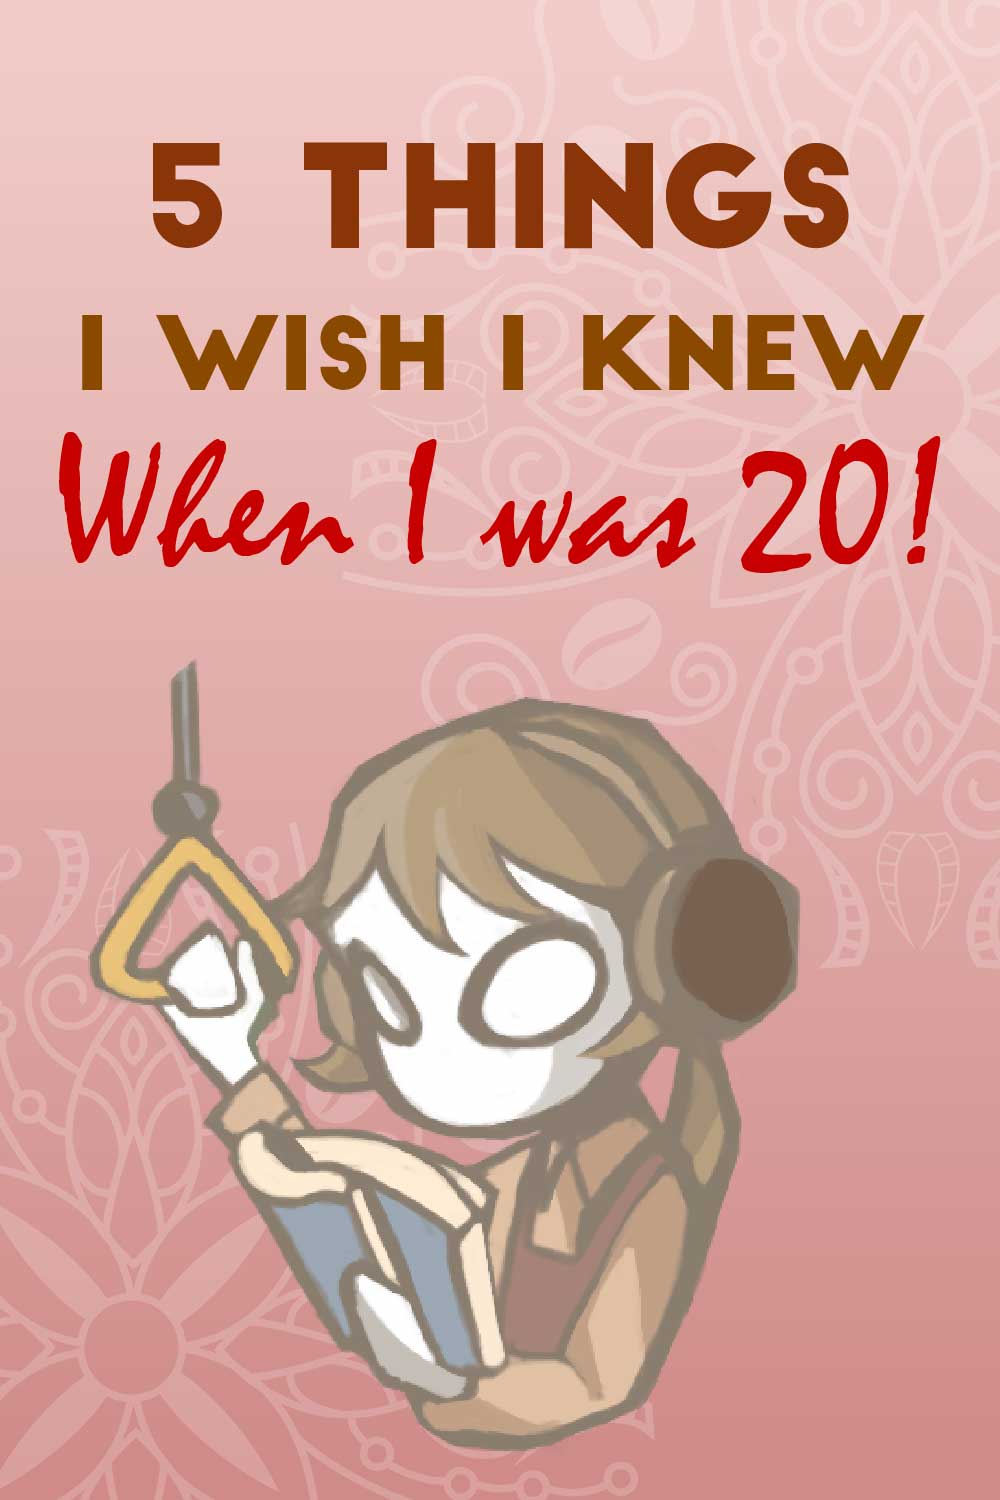 5 Things I wish I knew when I was 20!